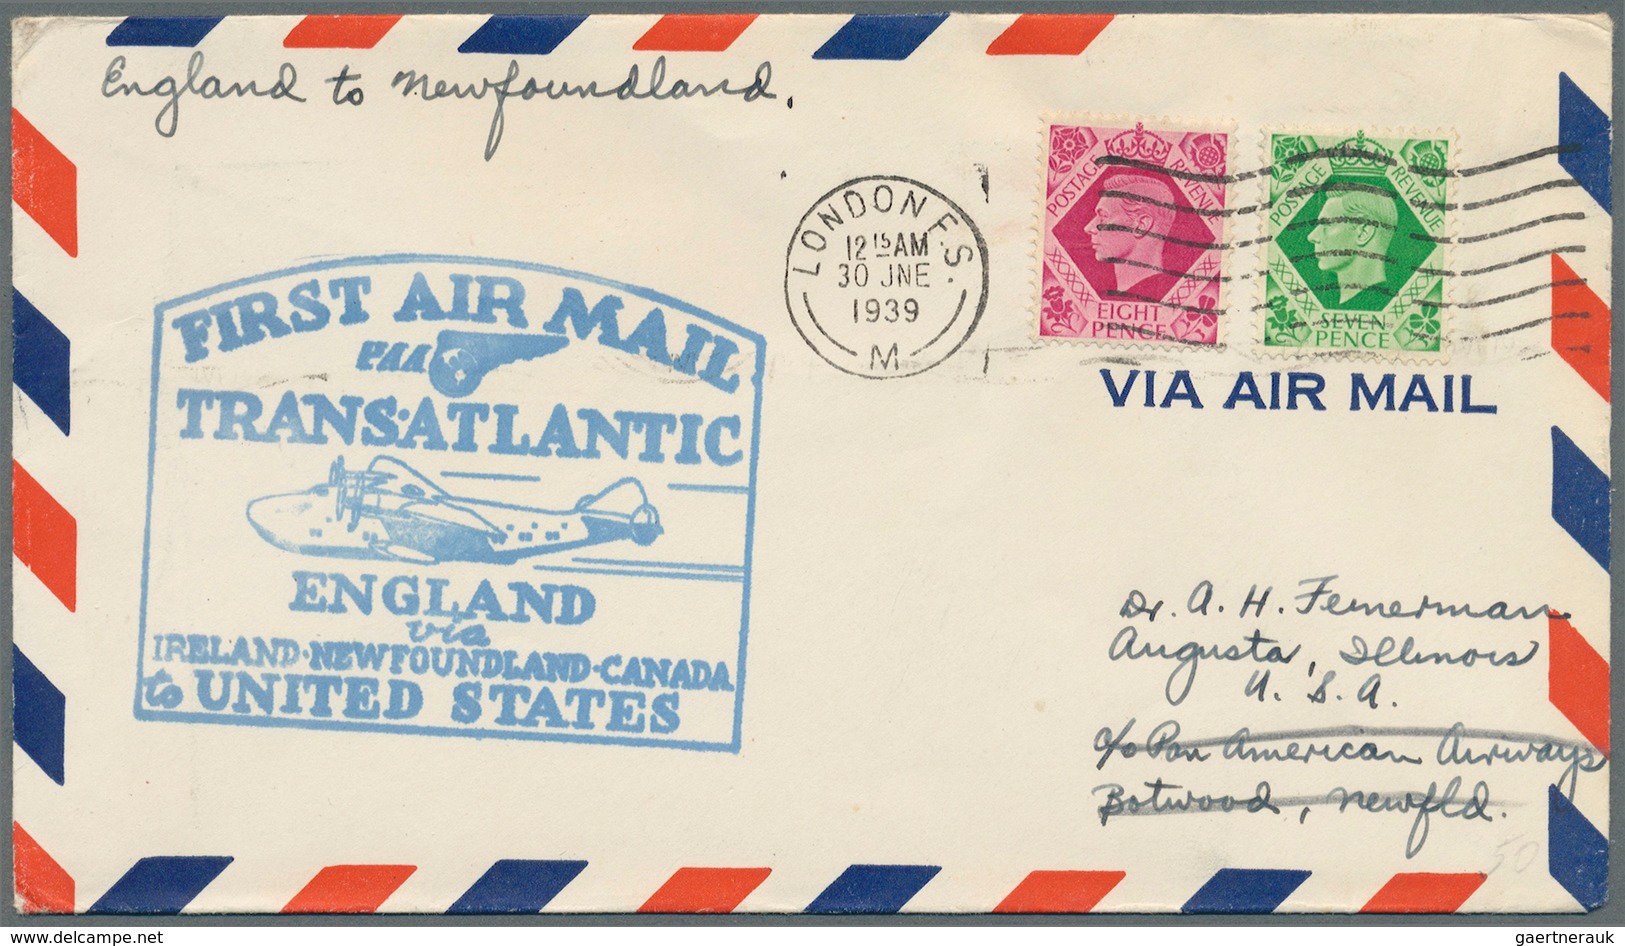 Großbritannien: 1911 from, attractive lot of 49 items "AIRMAIL", first and foremost pre WWII covers